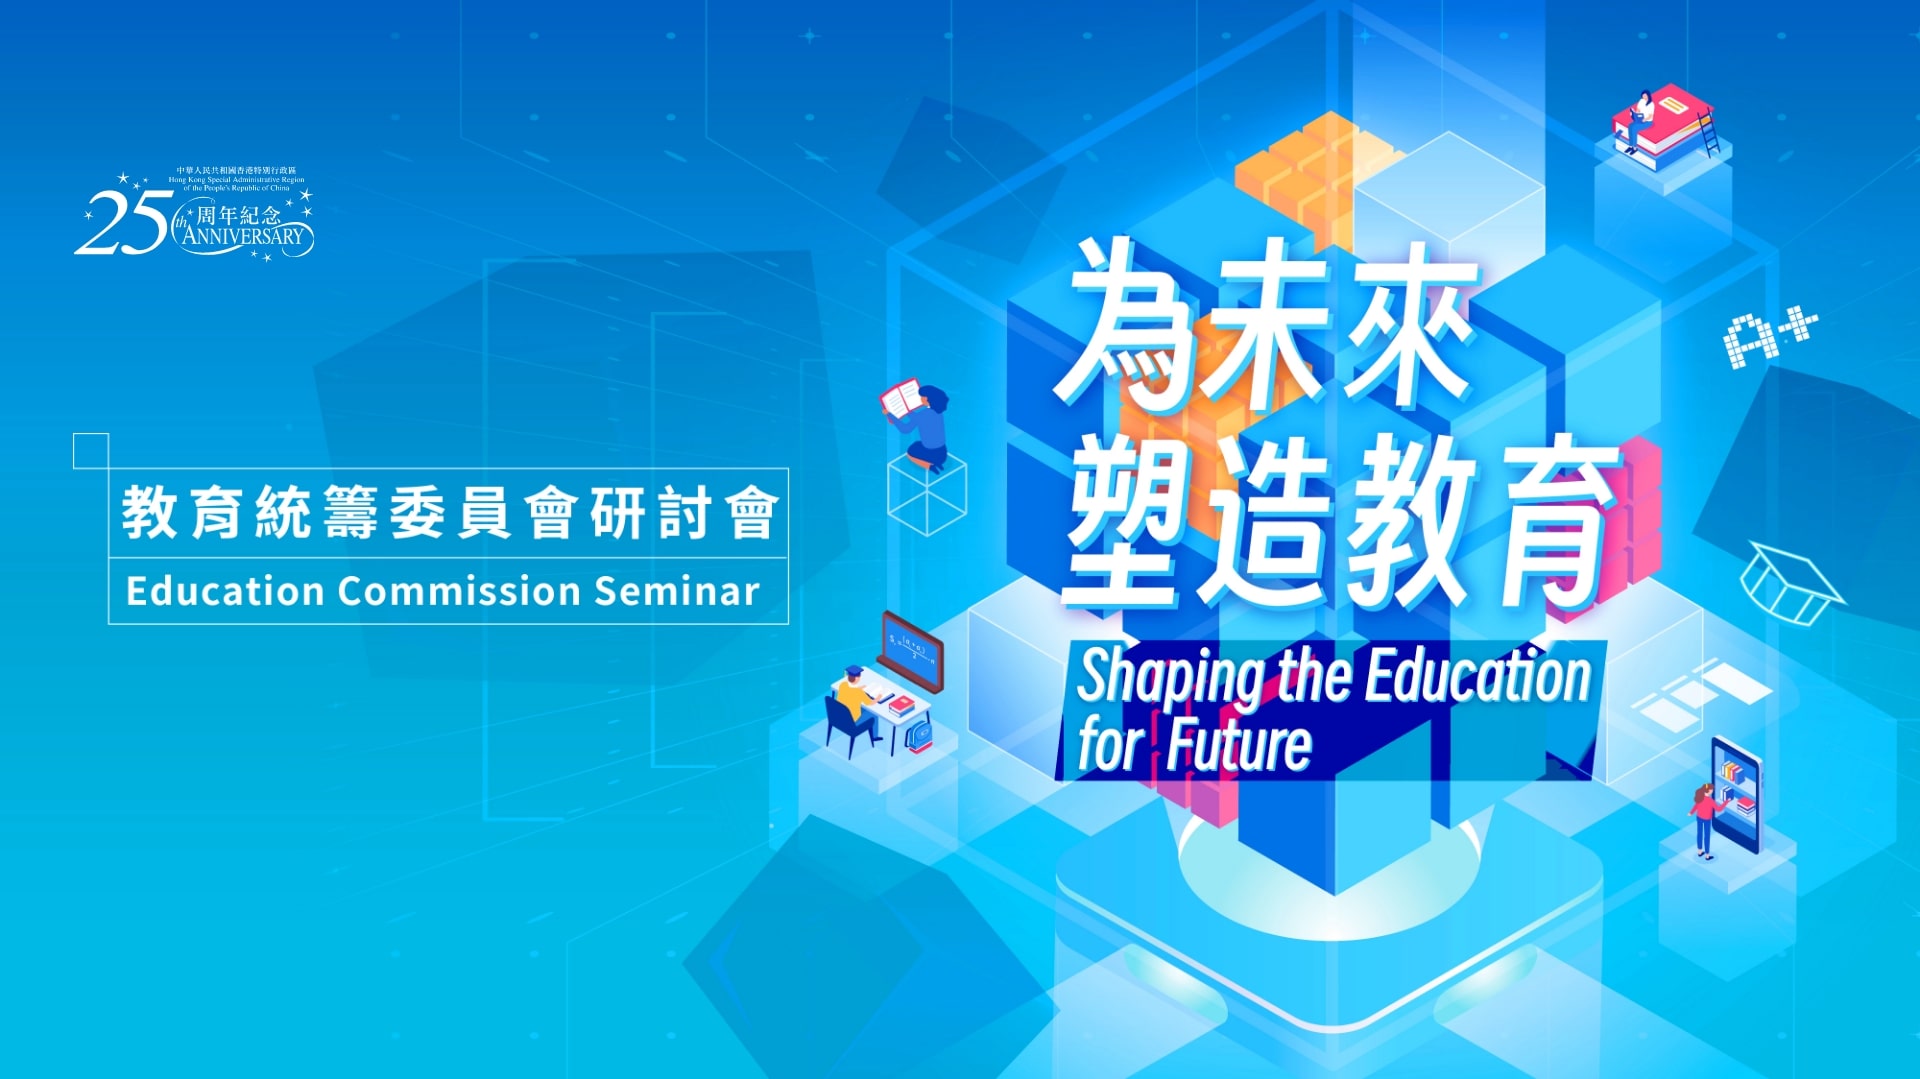 Event poster of Shaping the Education for Future